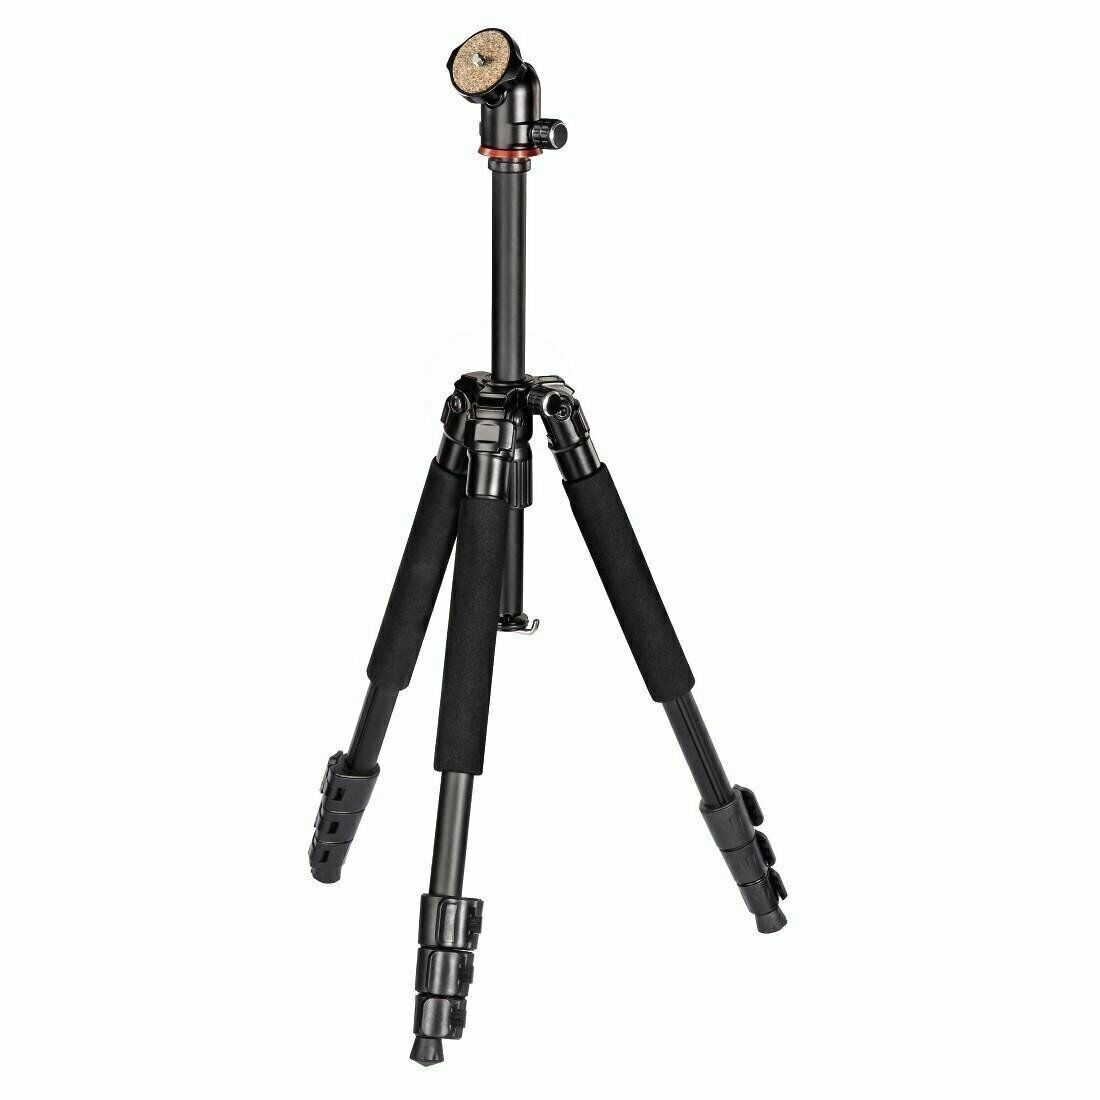 Product Image of Hama Traveller compact photography Tripod with ball head 117cm 46" With Case